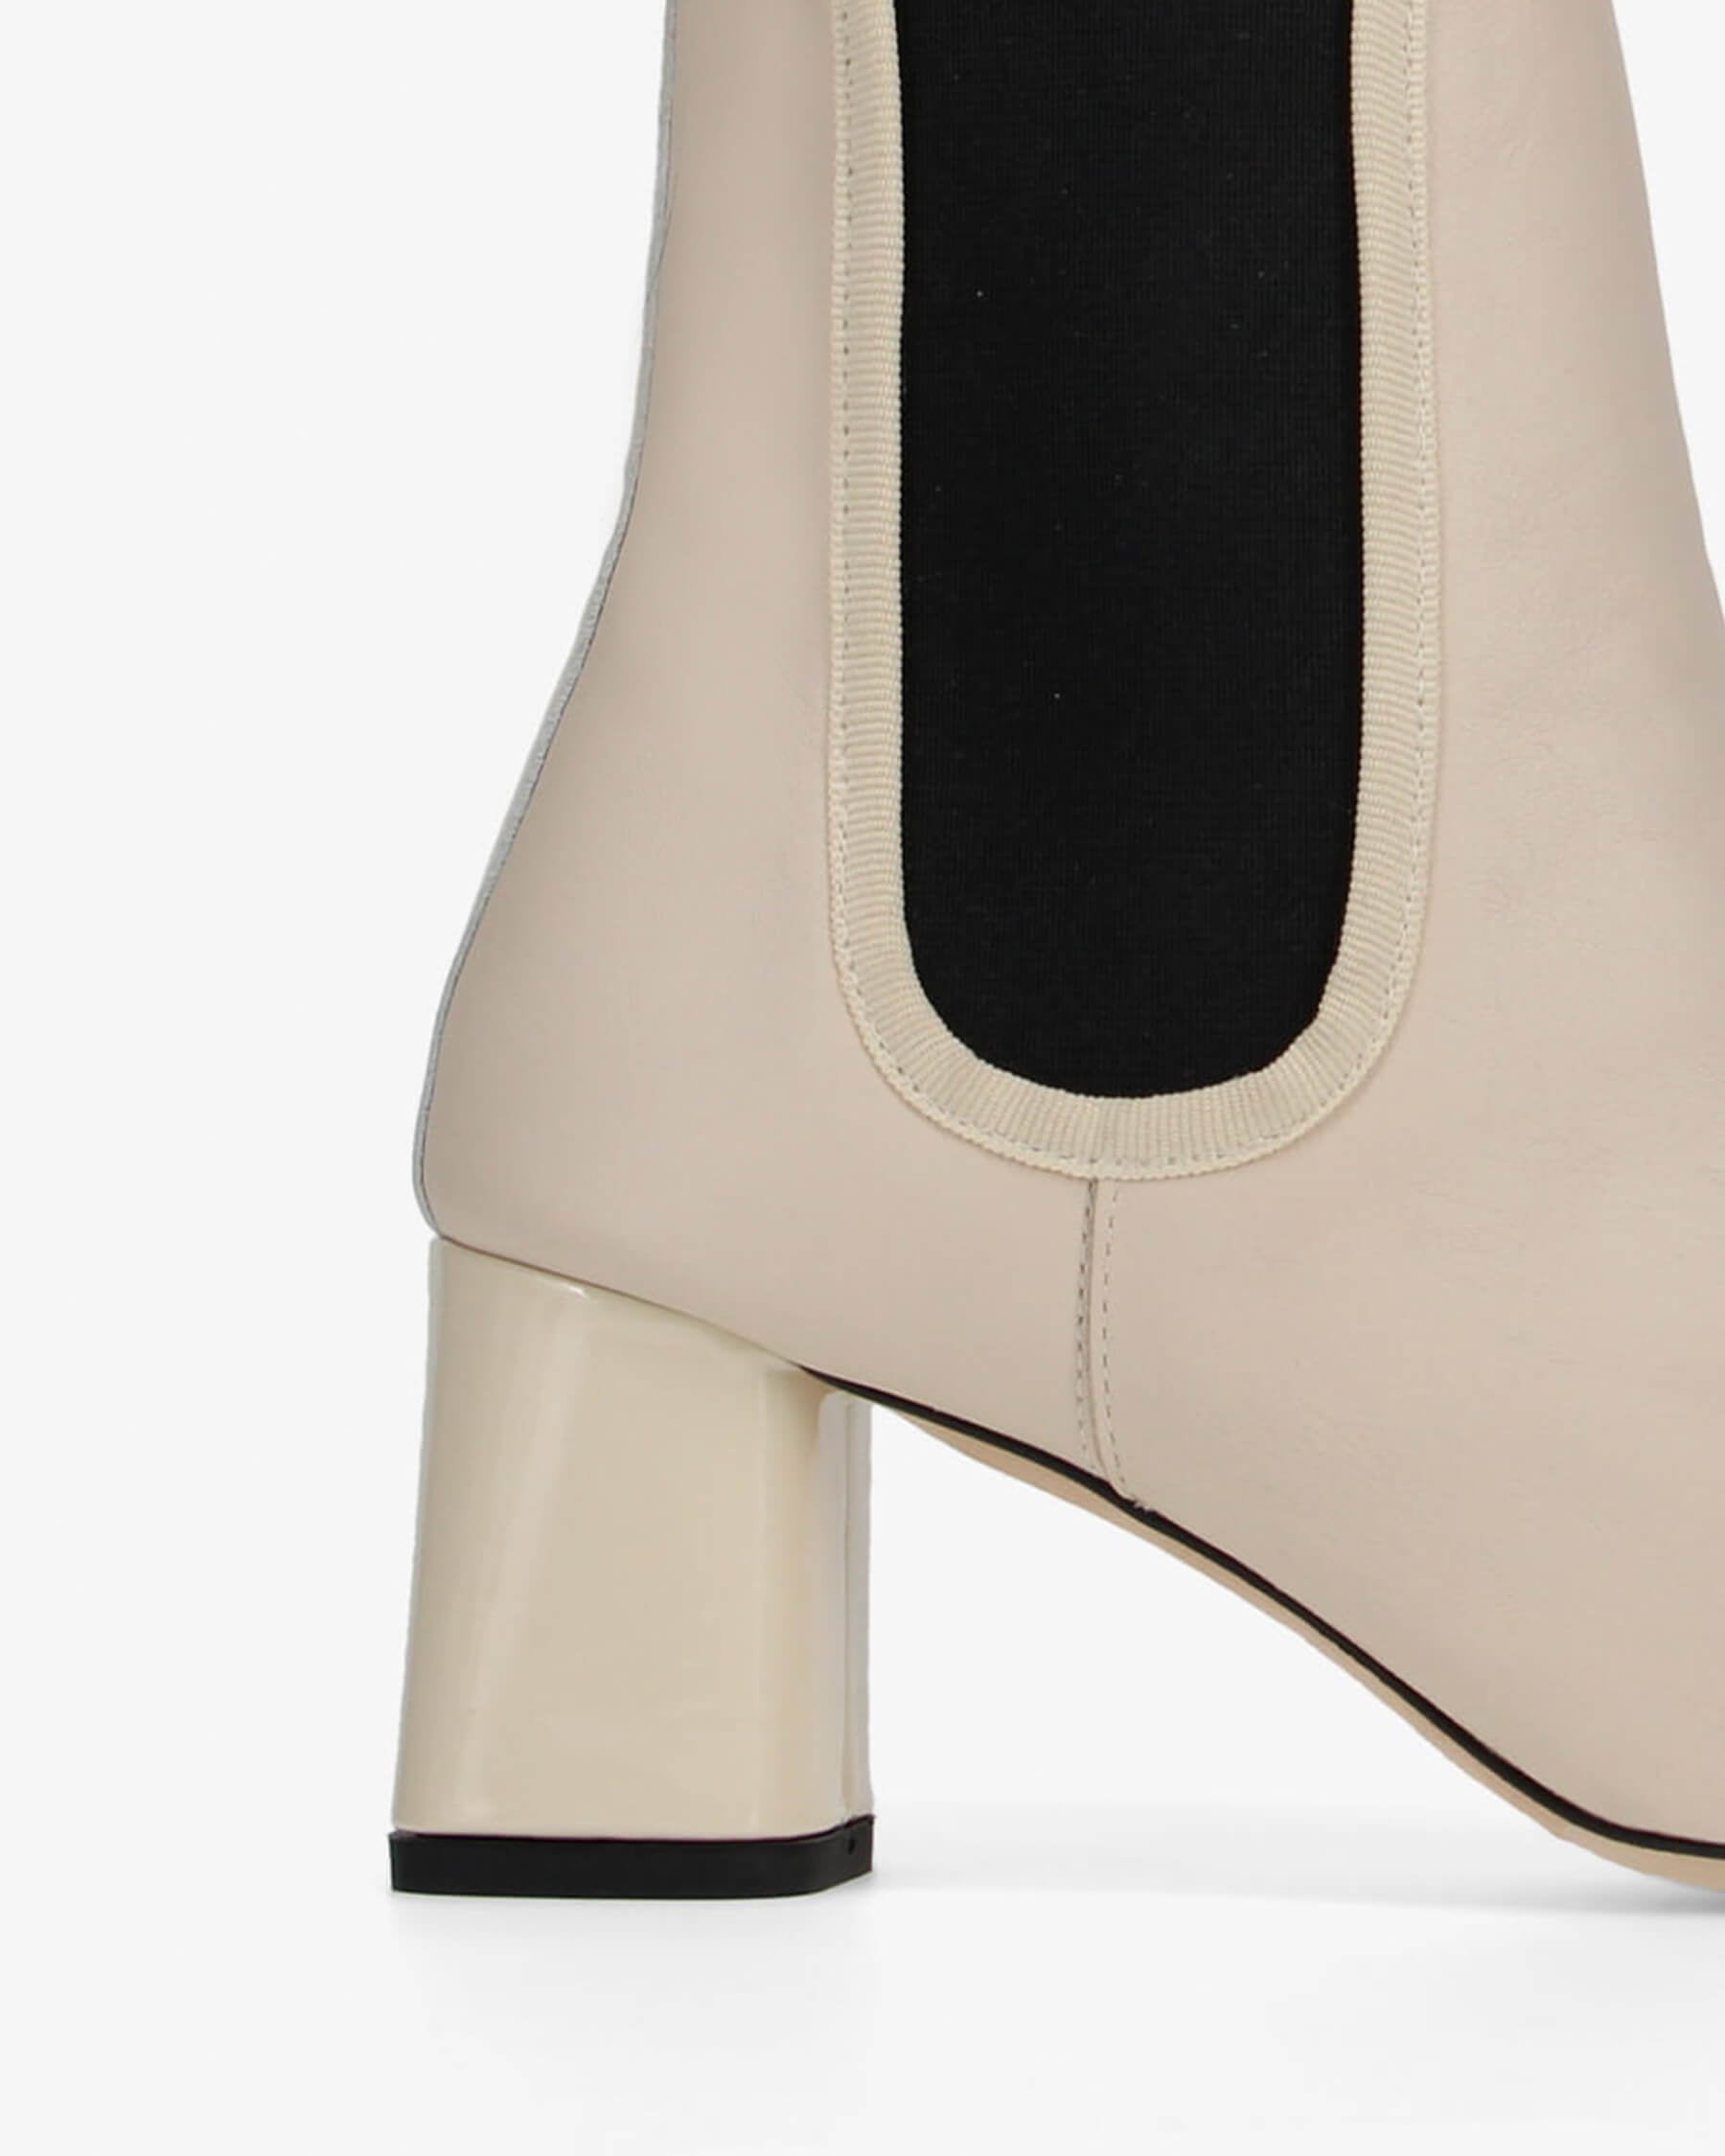 Melo ankle boots – Repetto